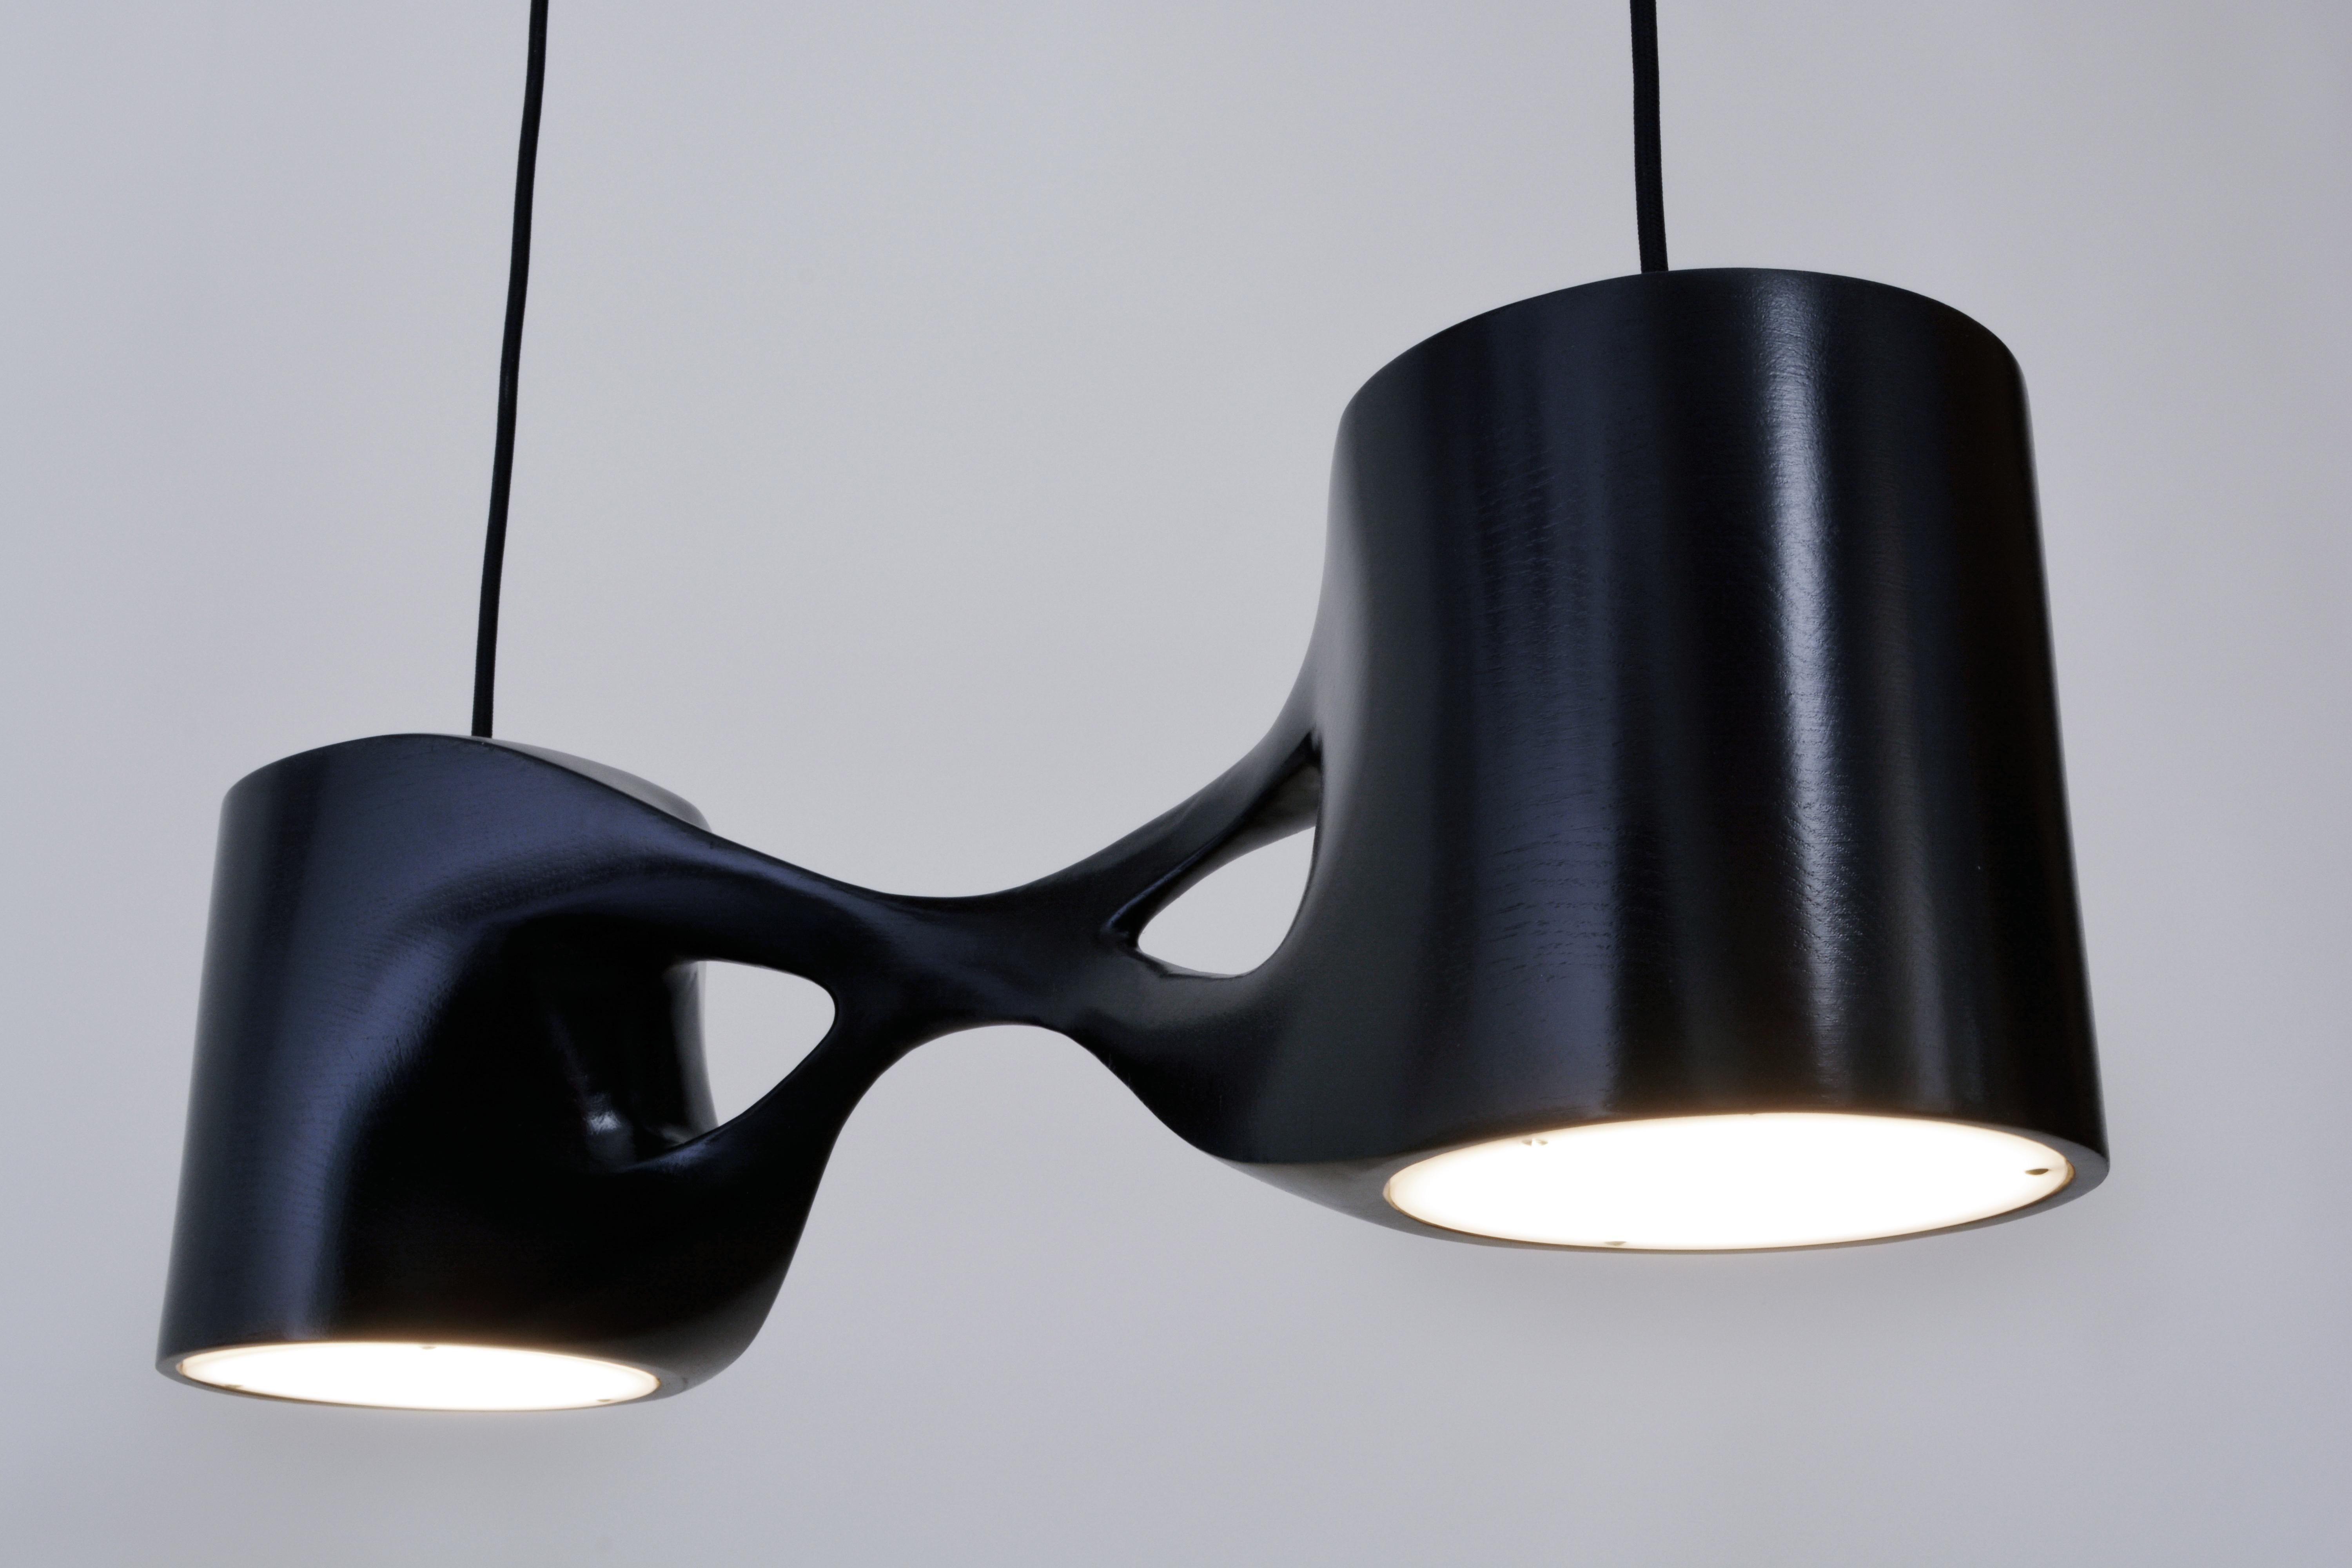 N2D pendant lamp by Aaron Scott
Dimensions: D 18 x W 74 x H 15.5 cm
Materials: ebonized oak.
Also available in other woods: walnut, bleached cherry, ebonized cherry,
ebonized walnut.

All our lamps can be wired according to each country. If